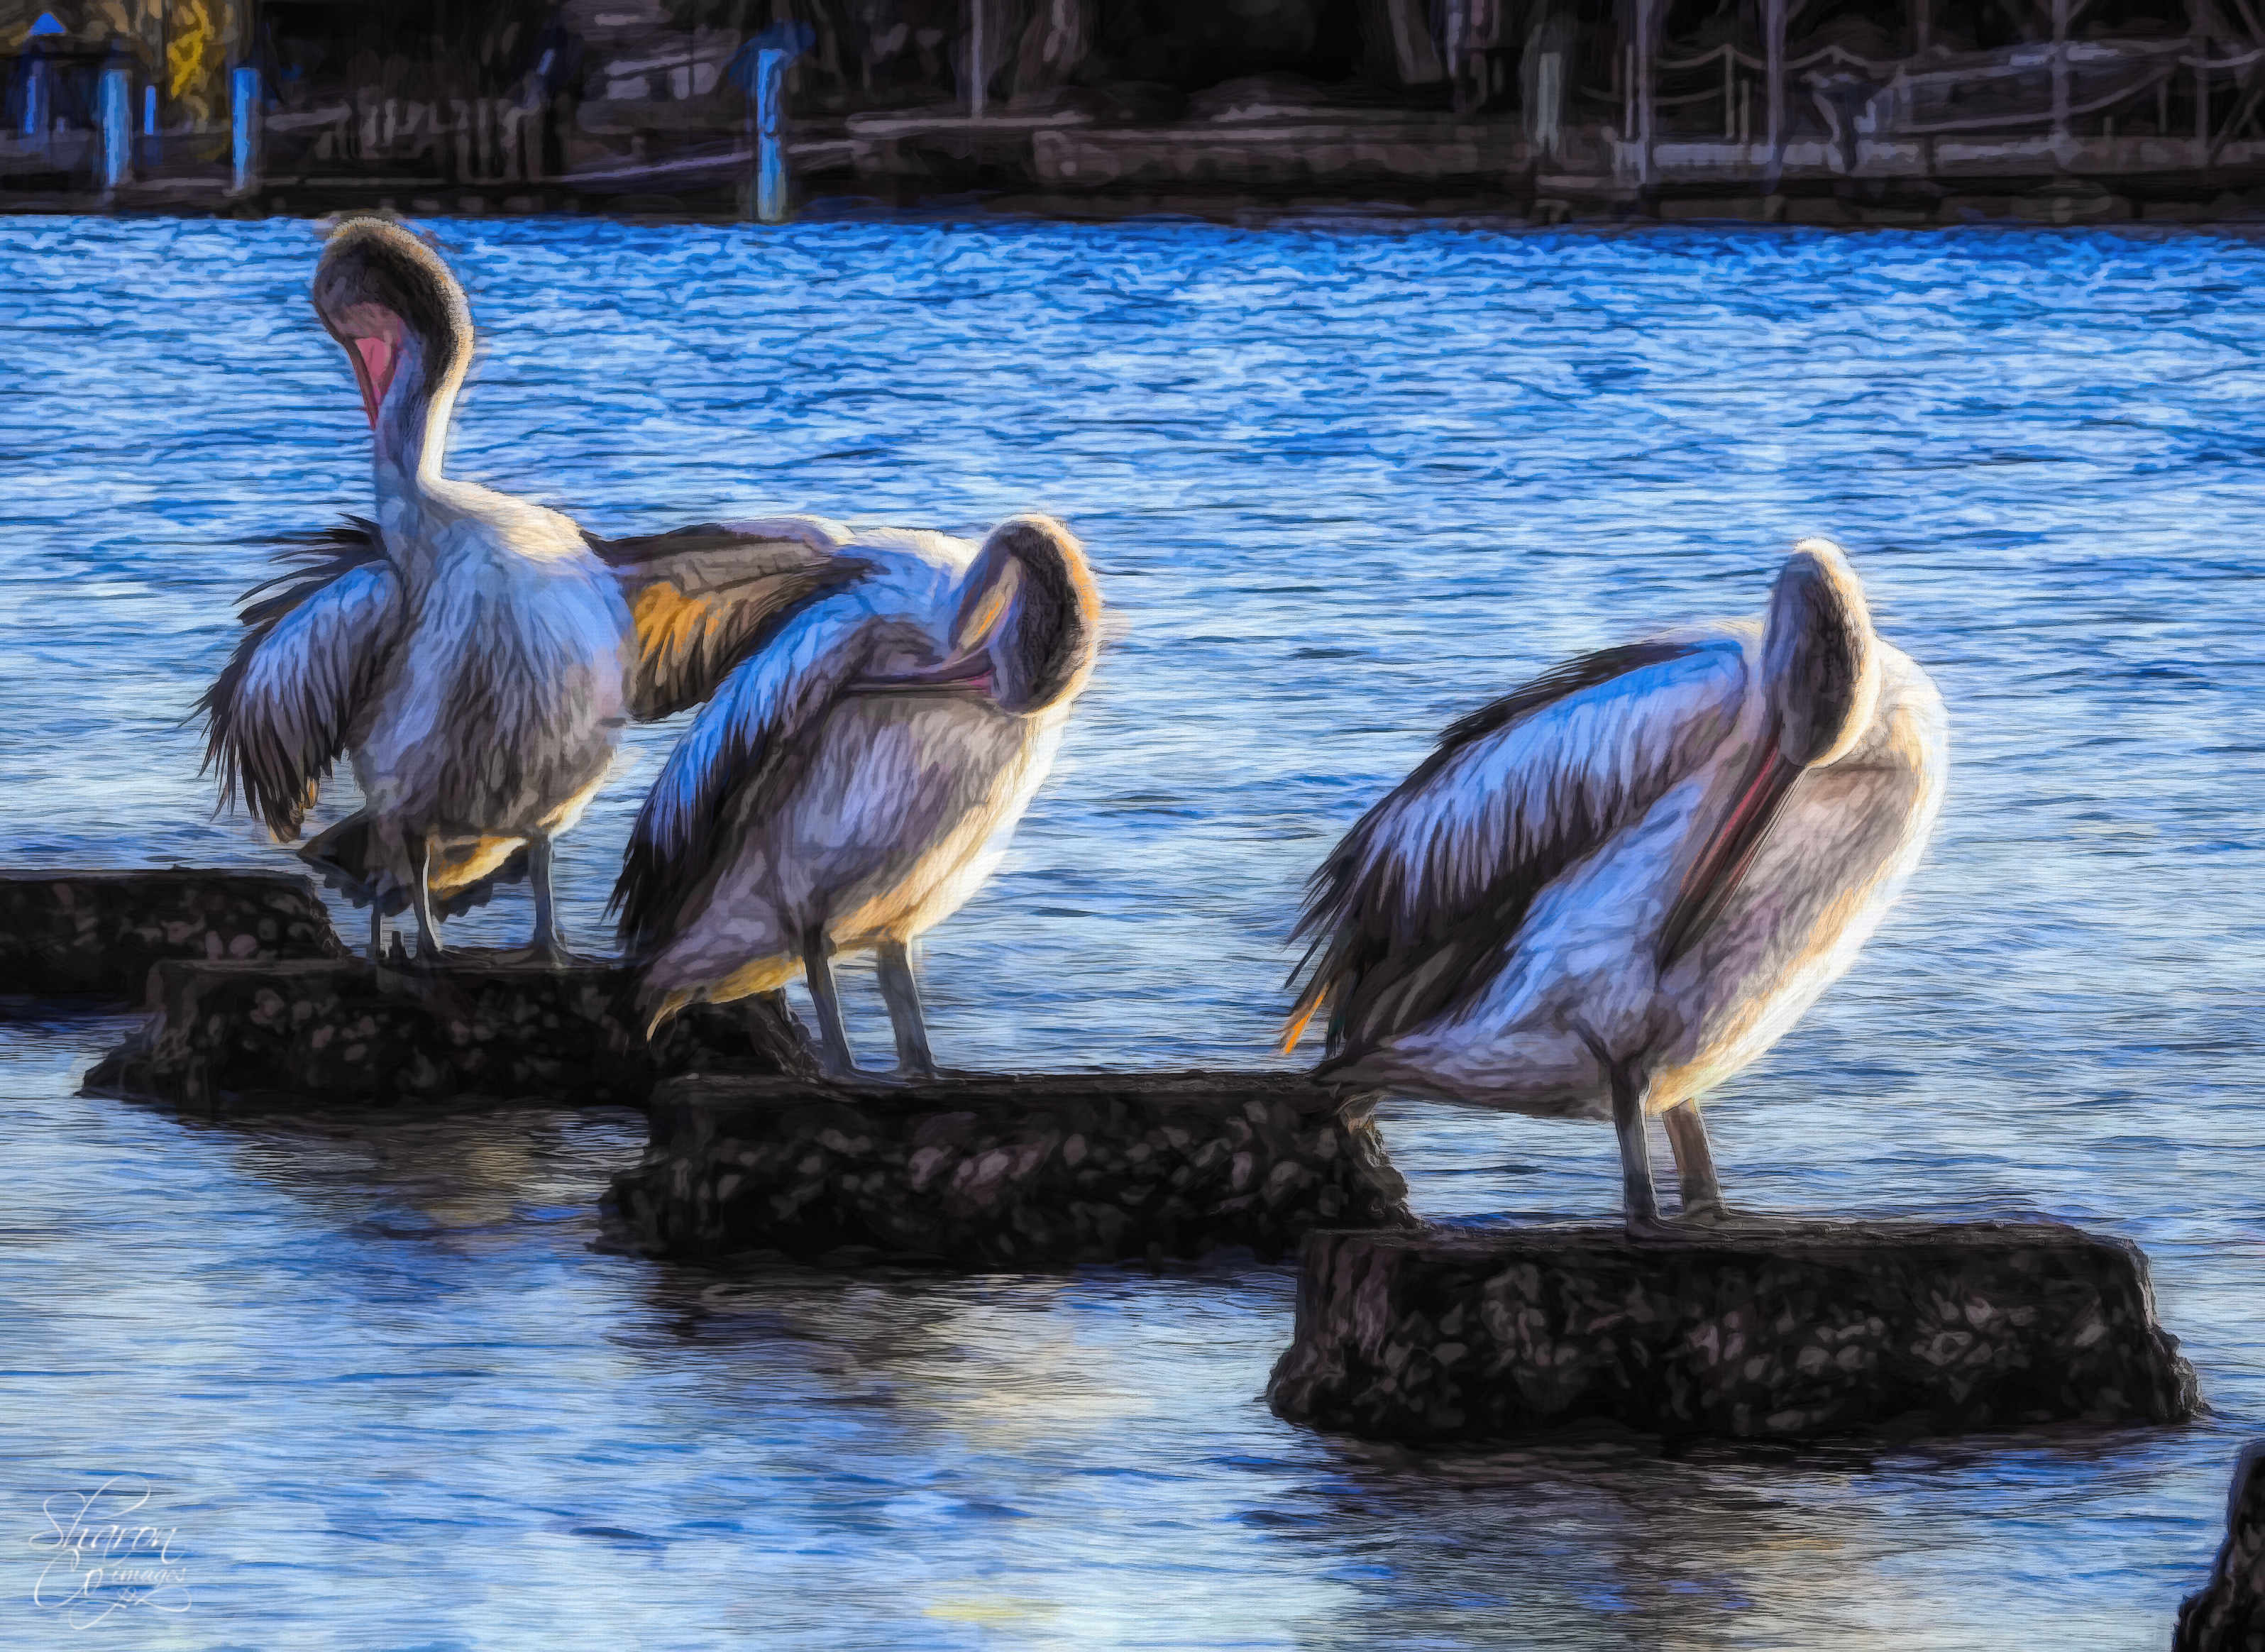 Three pelicans grooming - People and Animals - Topaz Discussion Forum